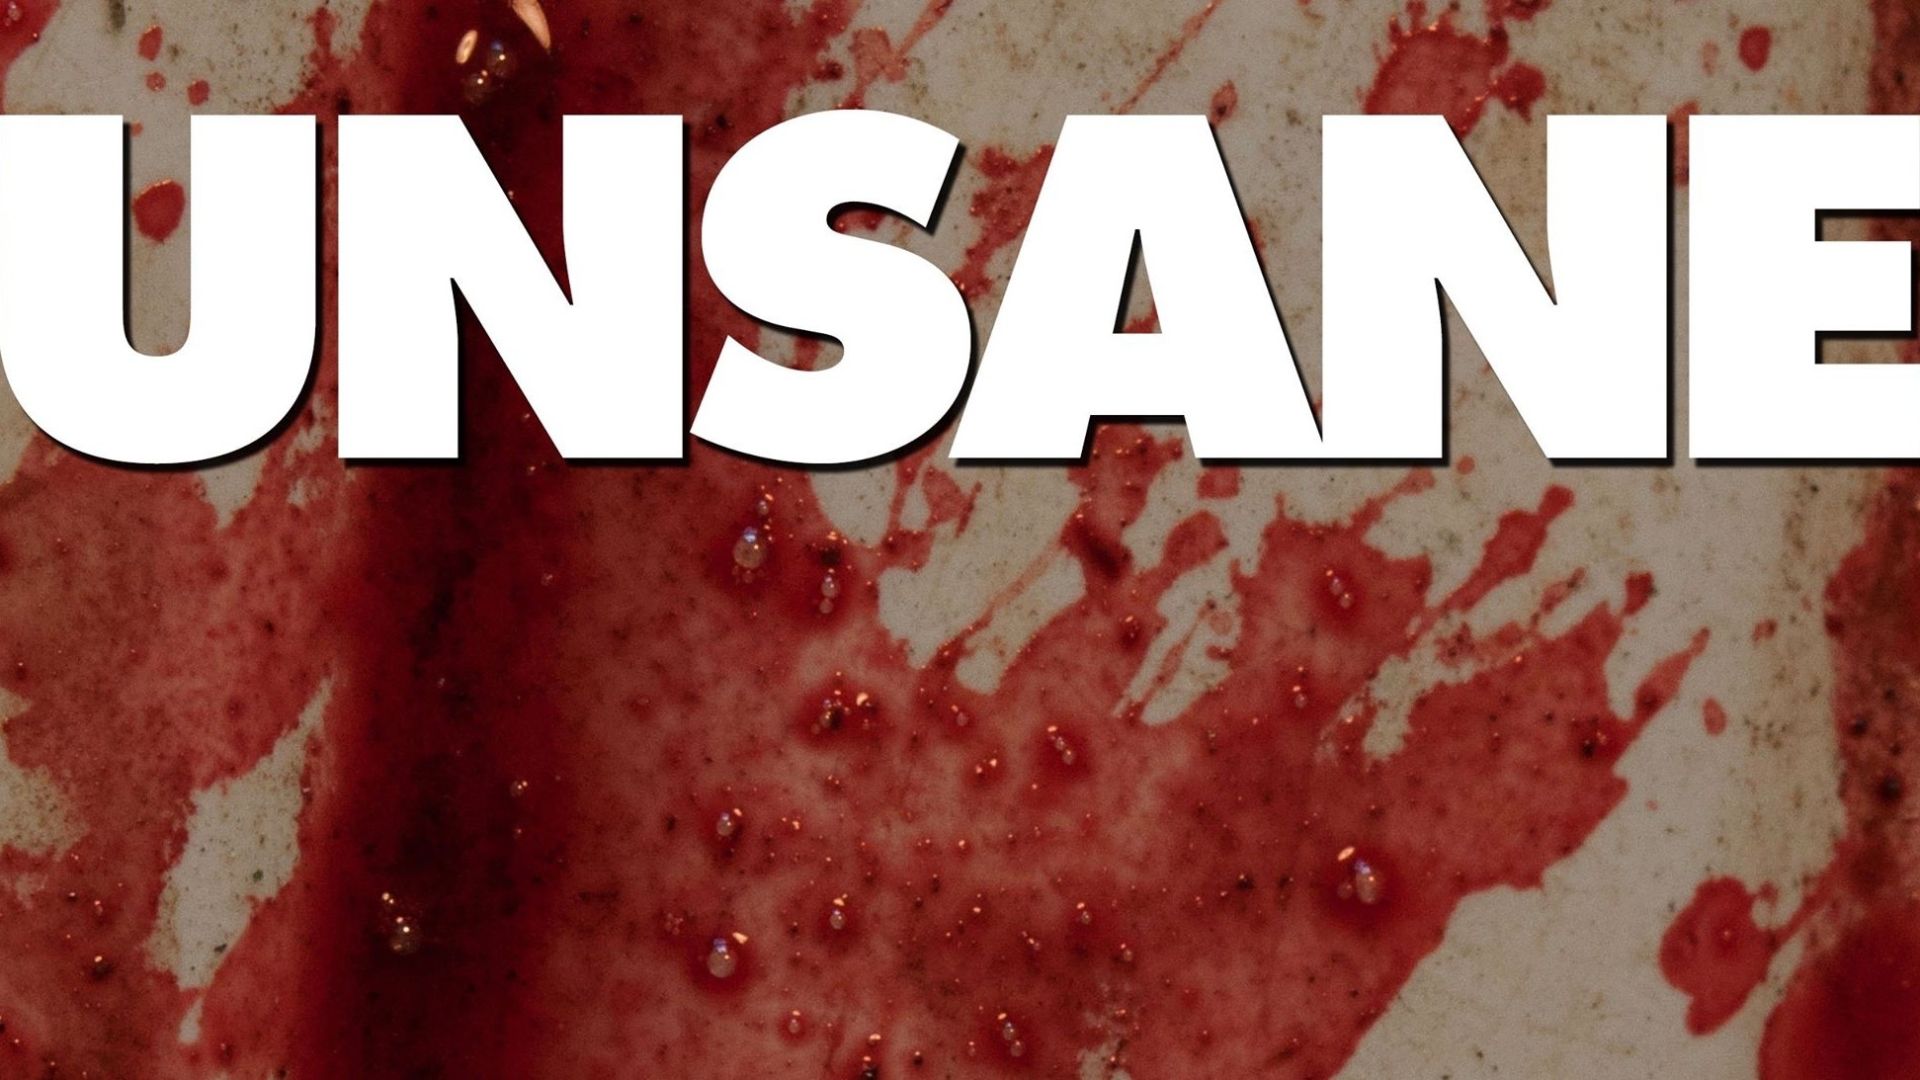 Unsane (usa) for "Early cuts tour" ∙ opening act. Viscera